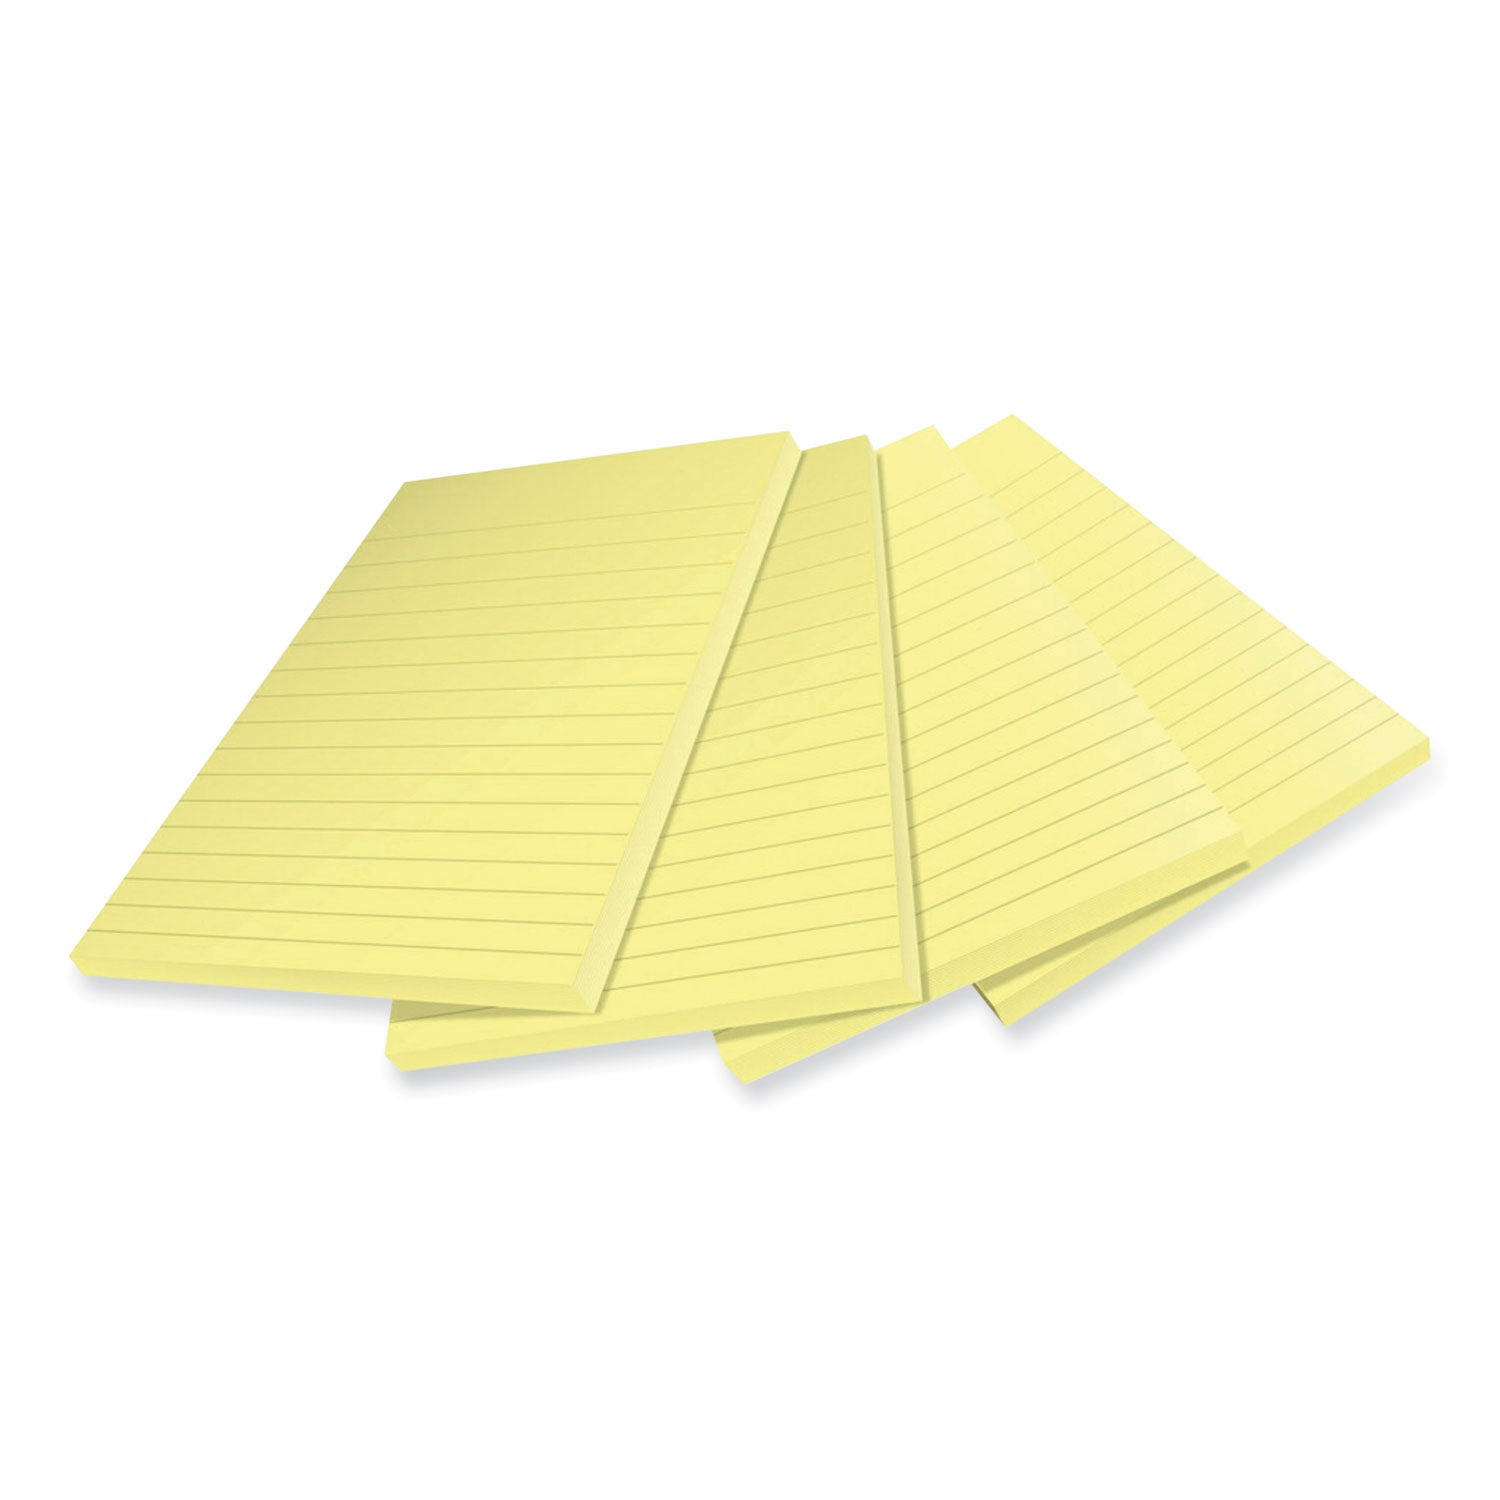 100%-recycled-paper-super-sticky-notes-ruled-4-x-6-canary-yellow-45-sheets-pad-4-pads-pack_mmm4621r4sscy - 3